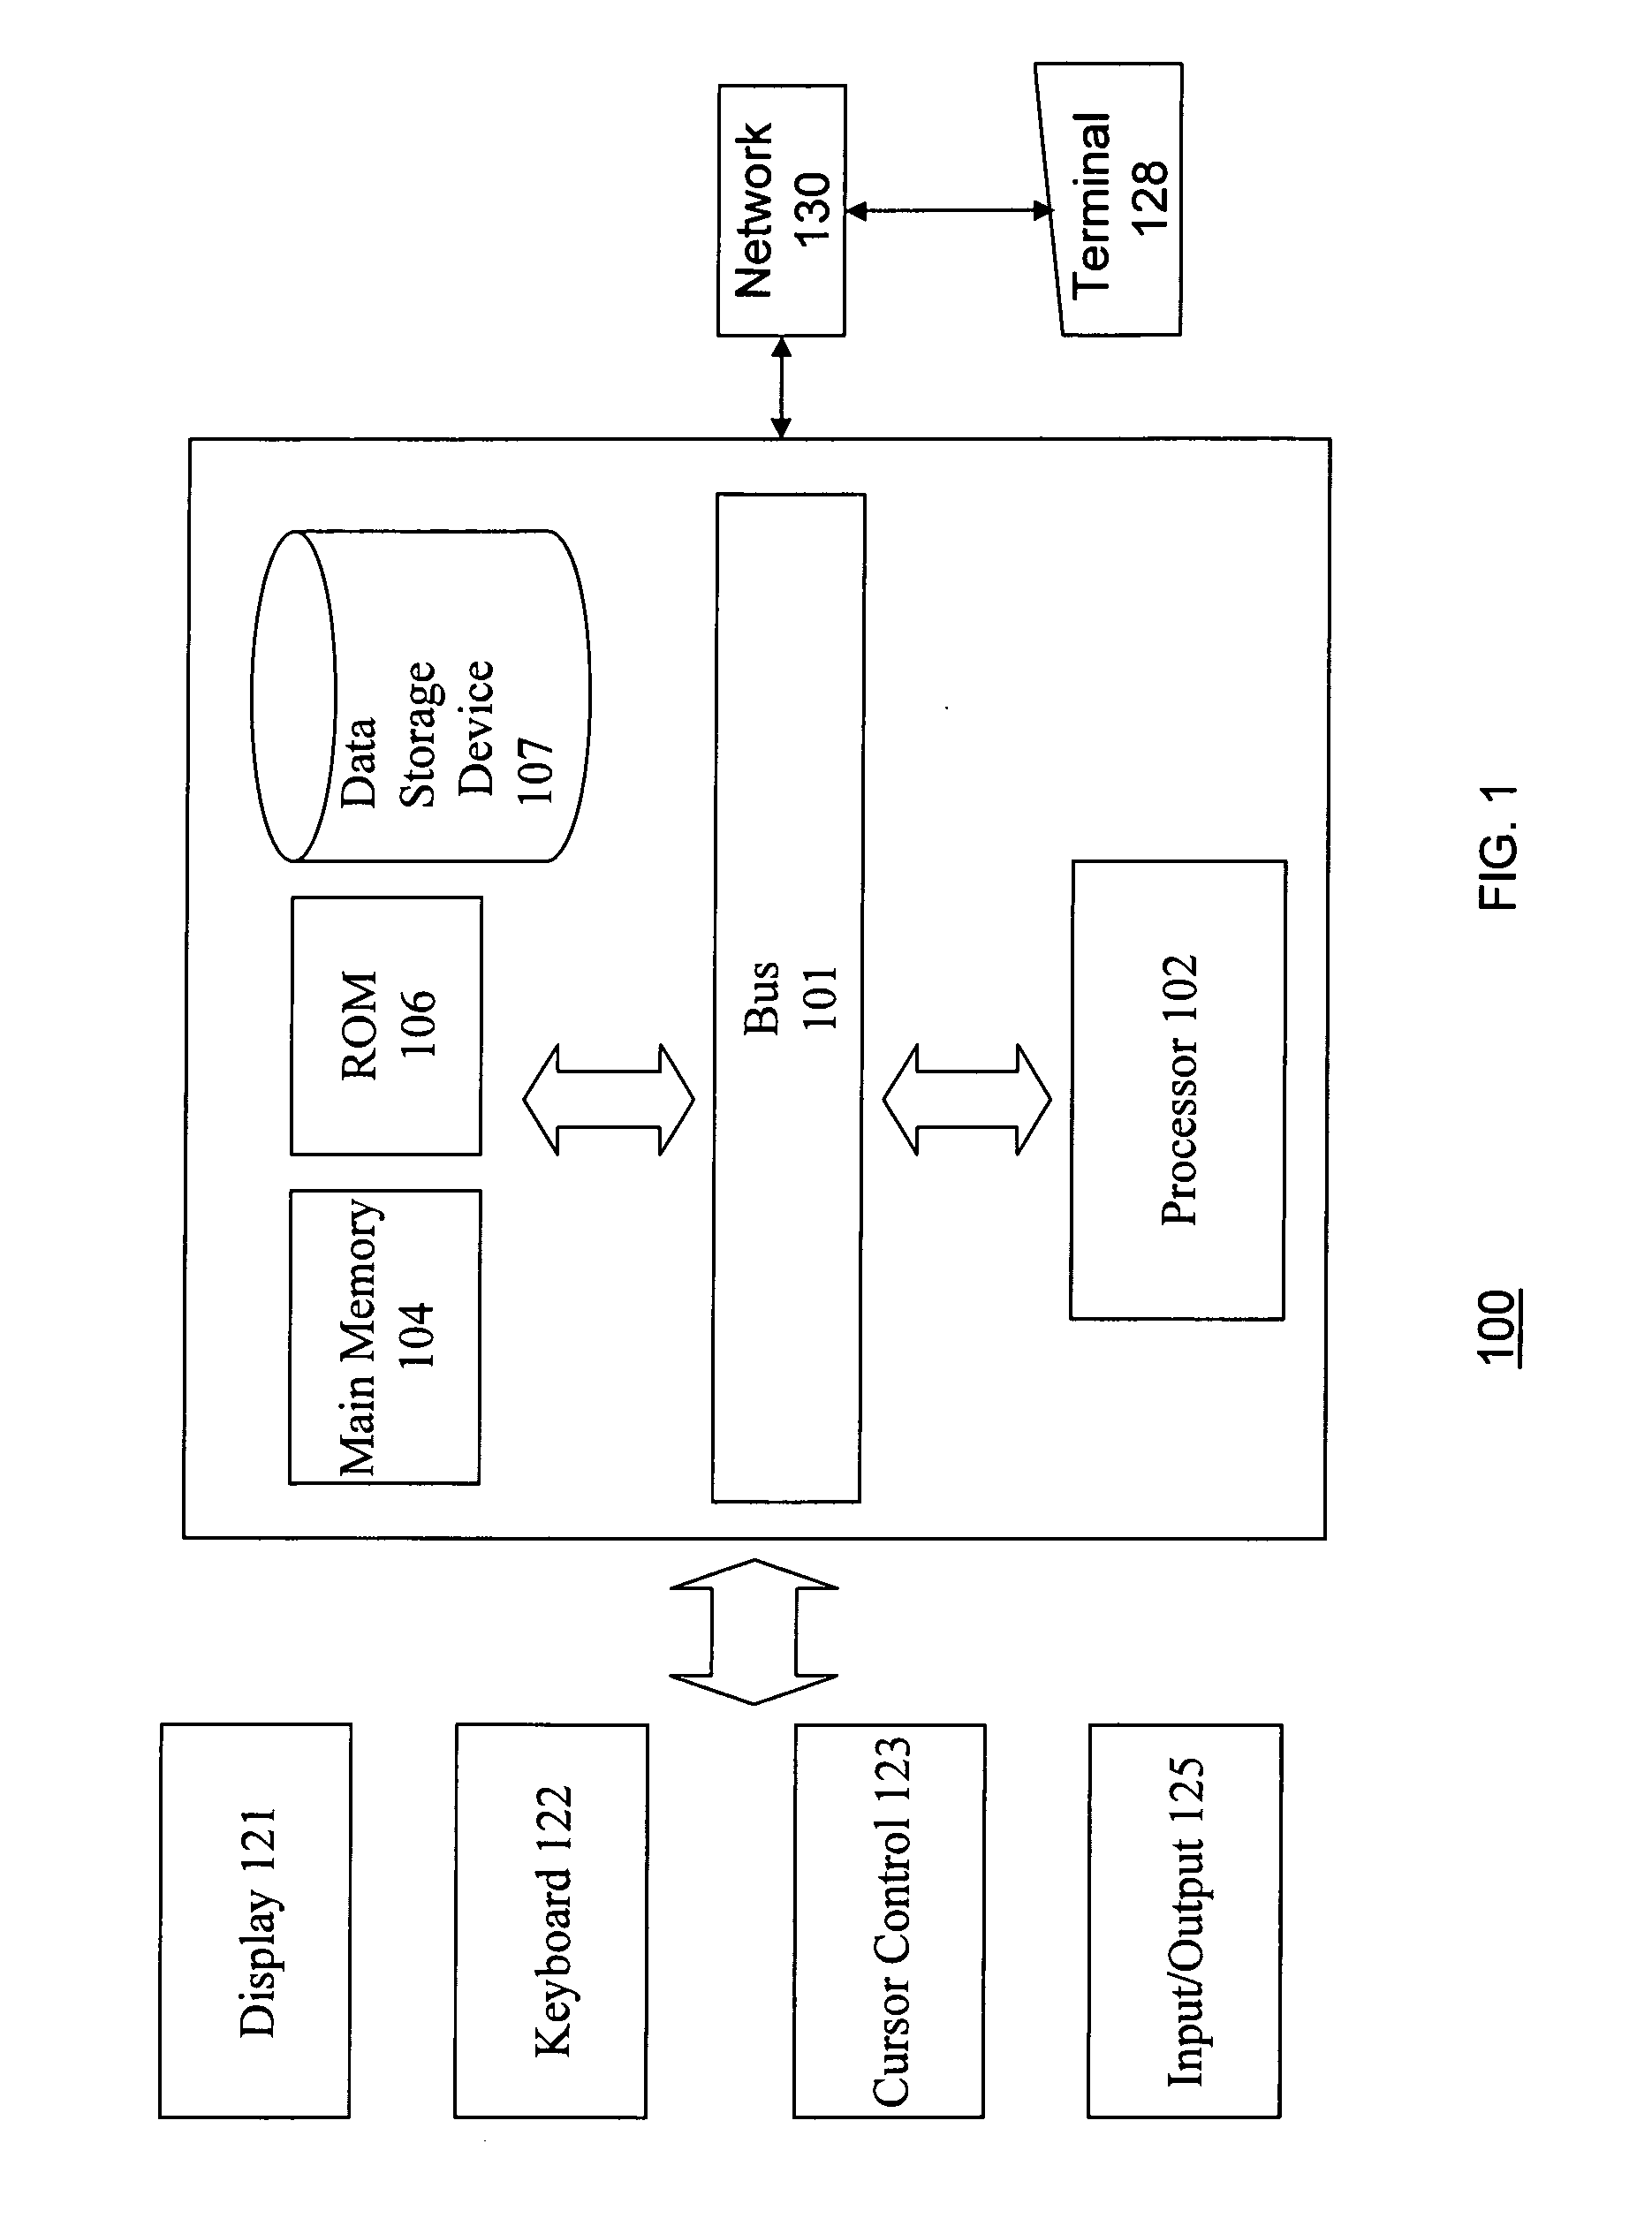 System and method for automatic environmental data validation